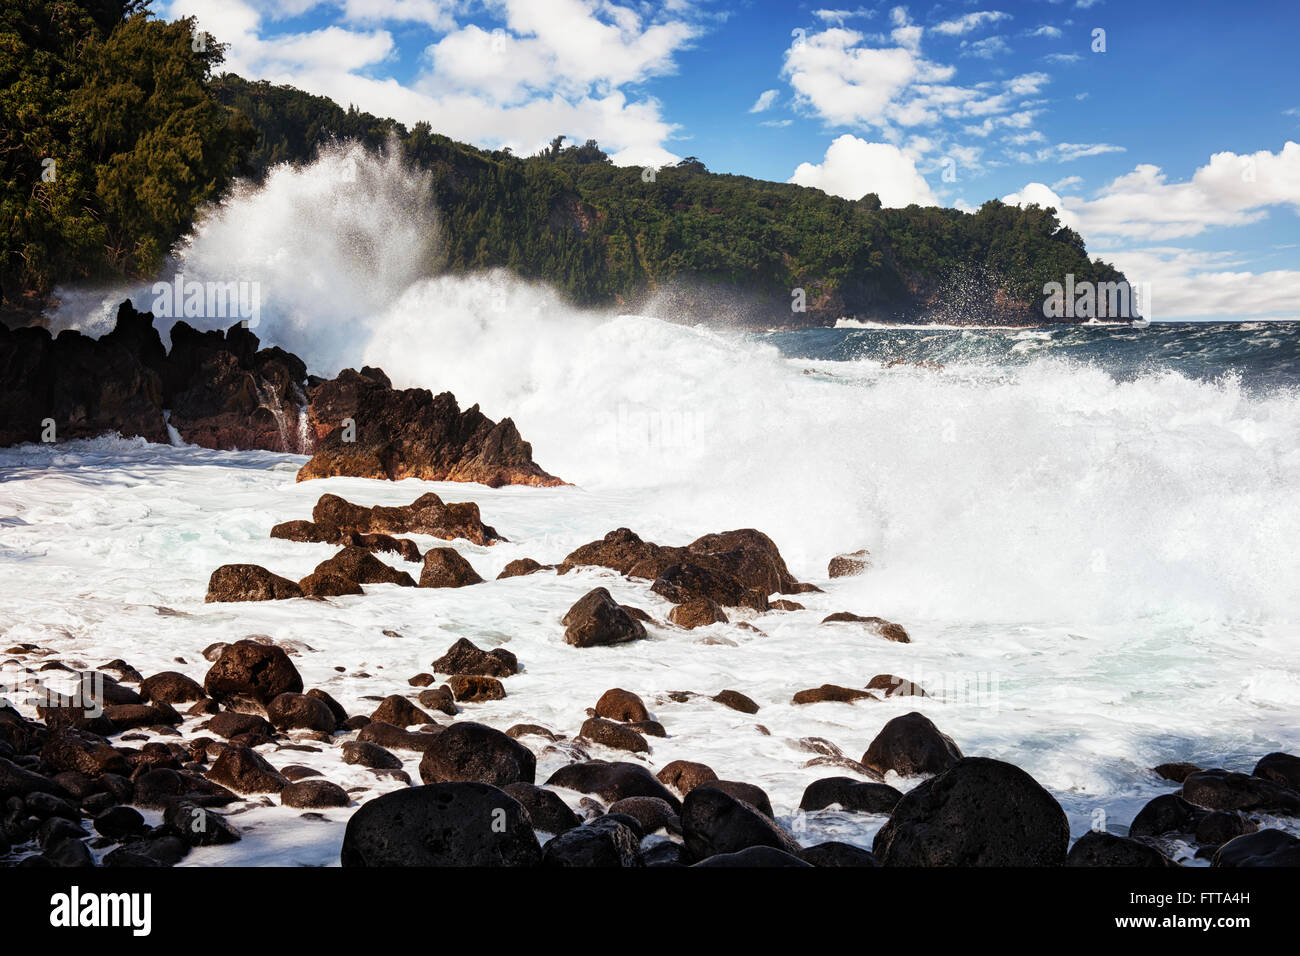 Giant waves and heavy surf pound the lava shoreline at Laupahoehoe Point on the Big Island of Hawaii. Stock Photo